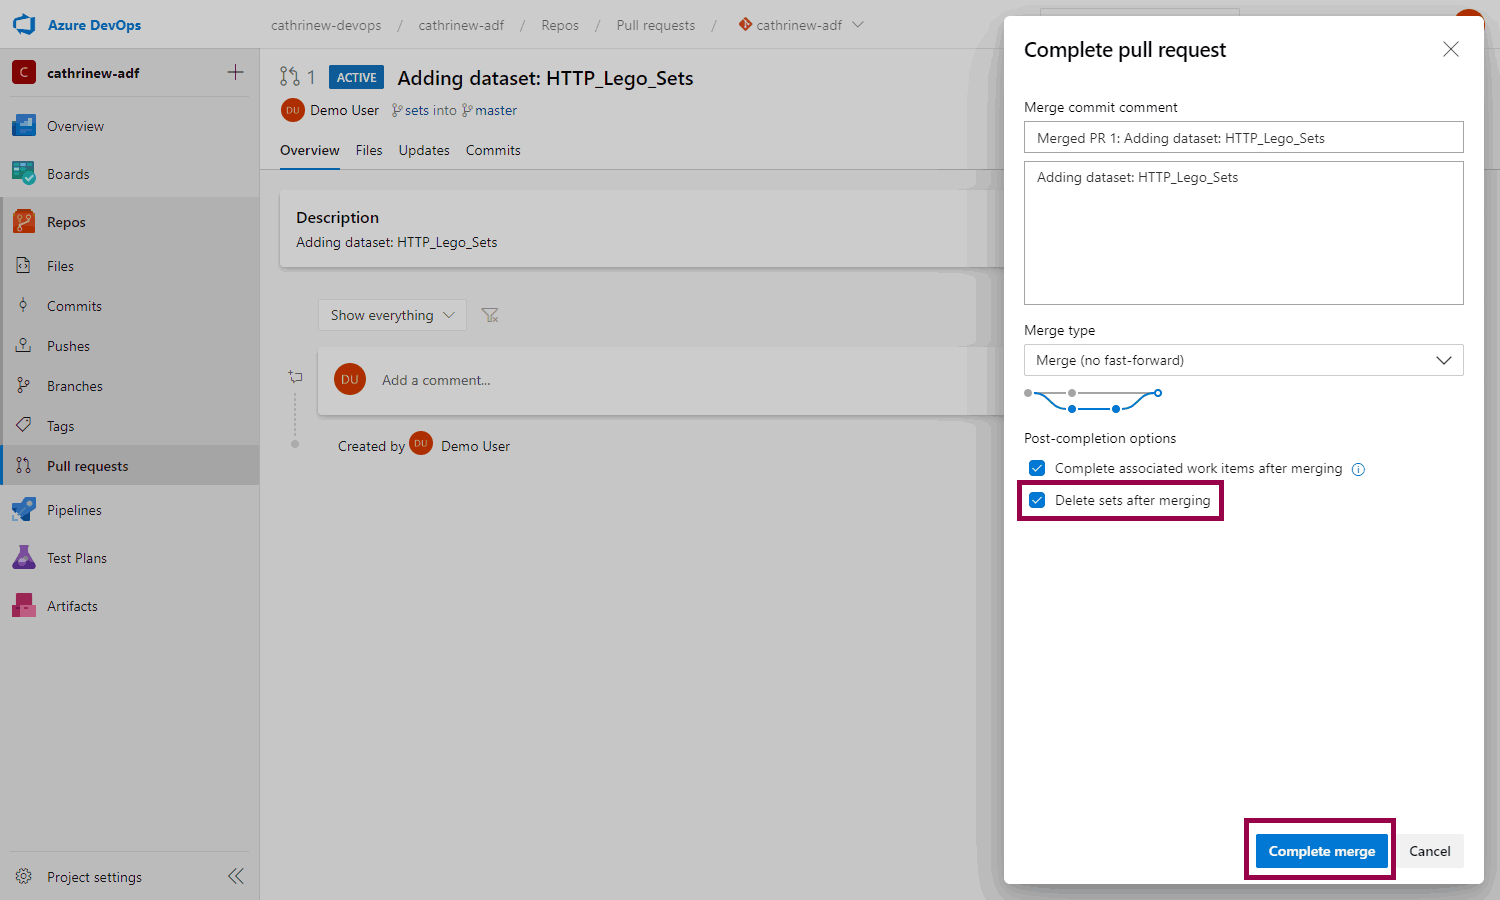 Screenshot of the complete pull request screen in Azure DevOps, highlighting the delete branch option